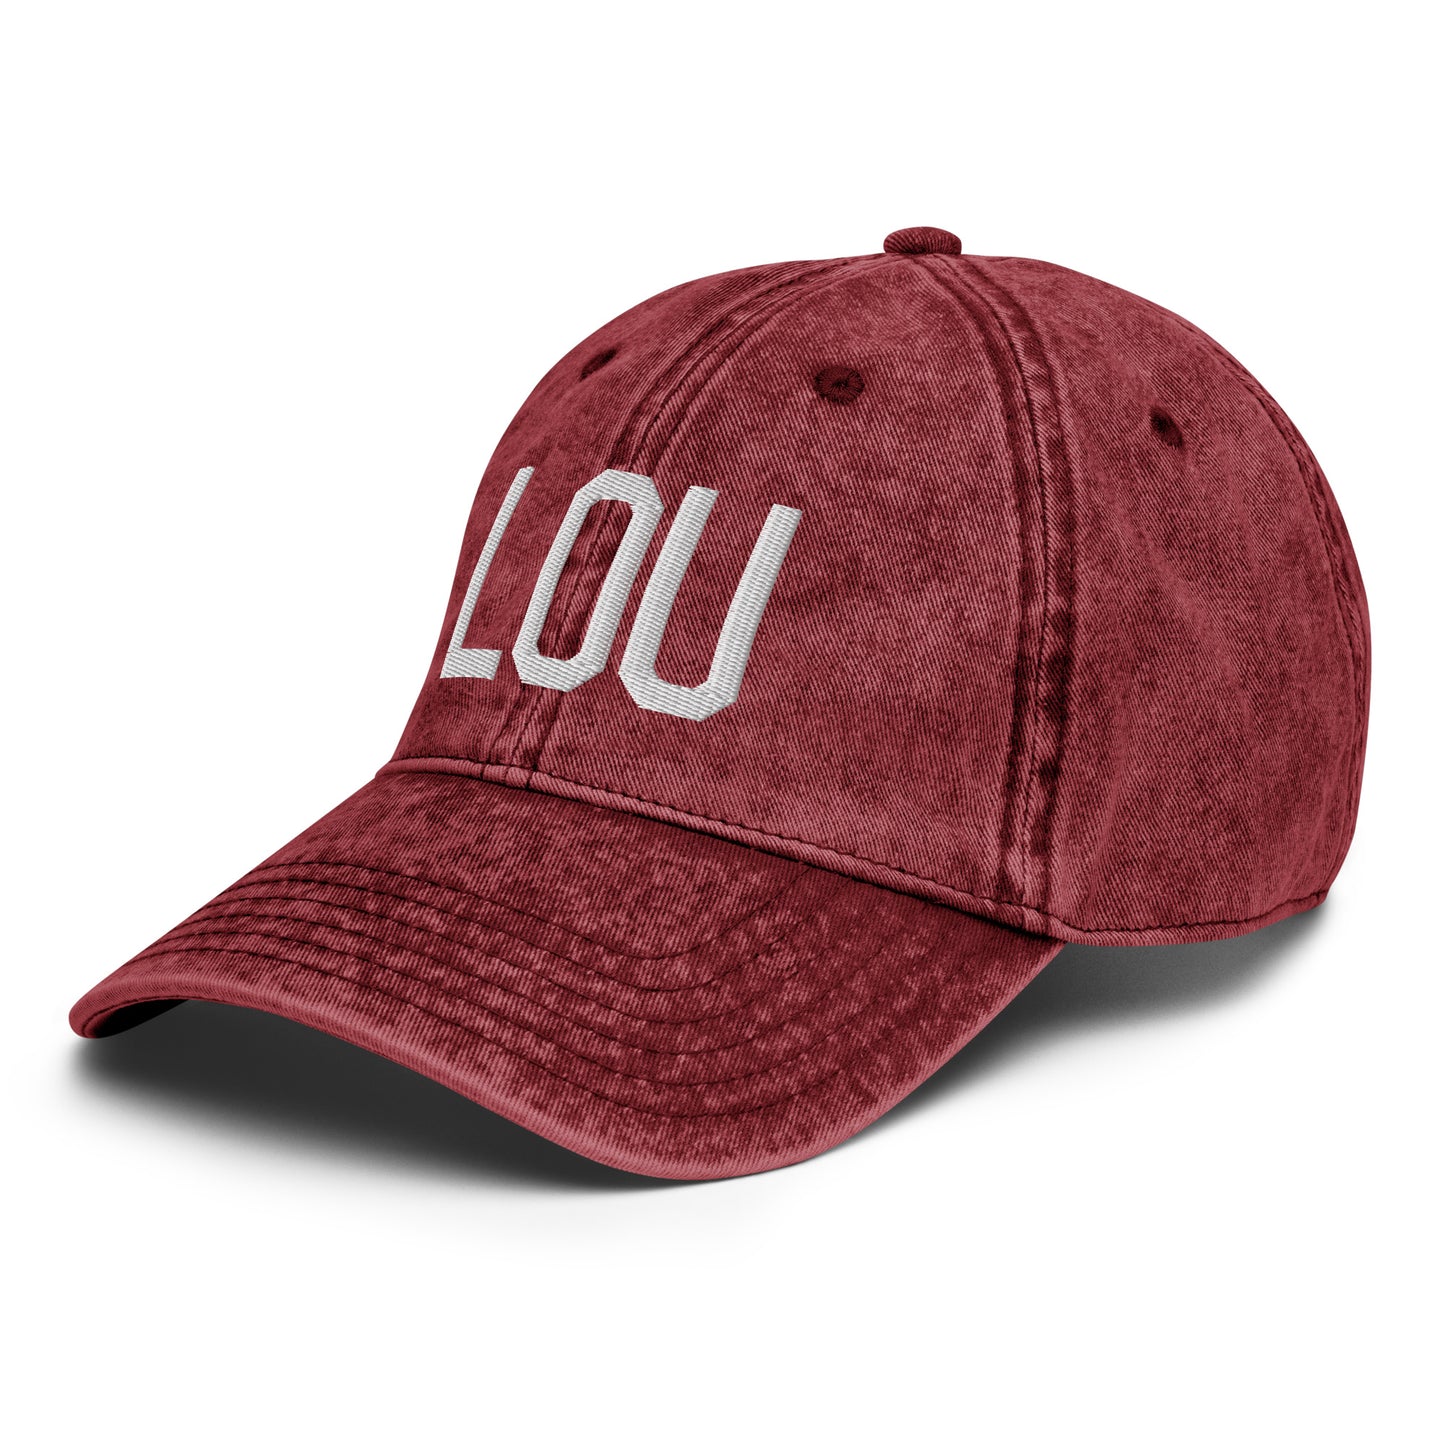 Airport Code Twill Cap - White • LOU Louisville • YHM Designs - Image 20